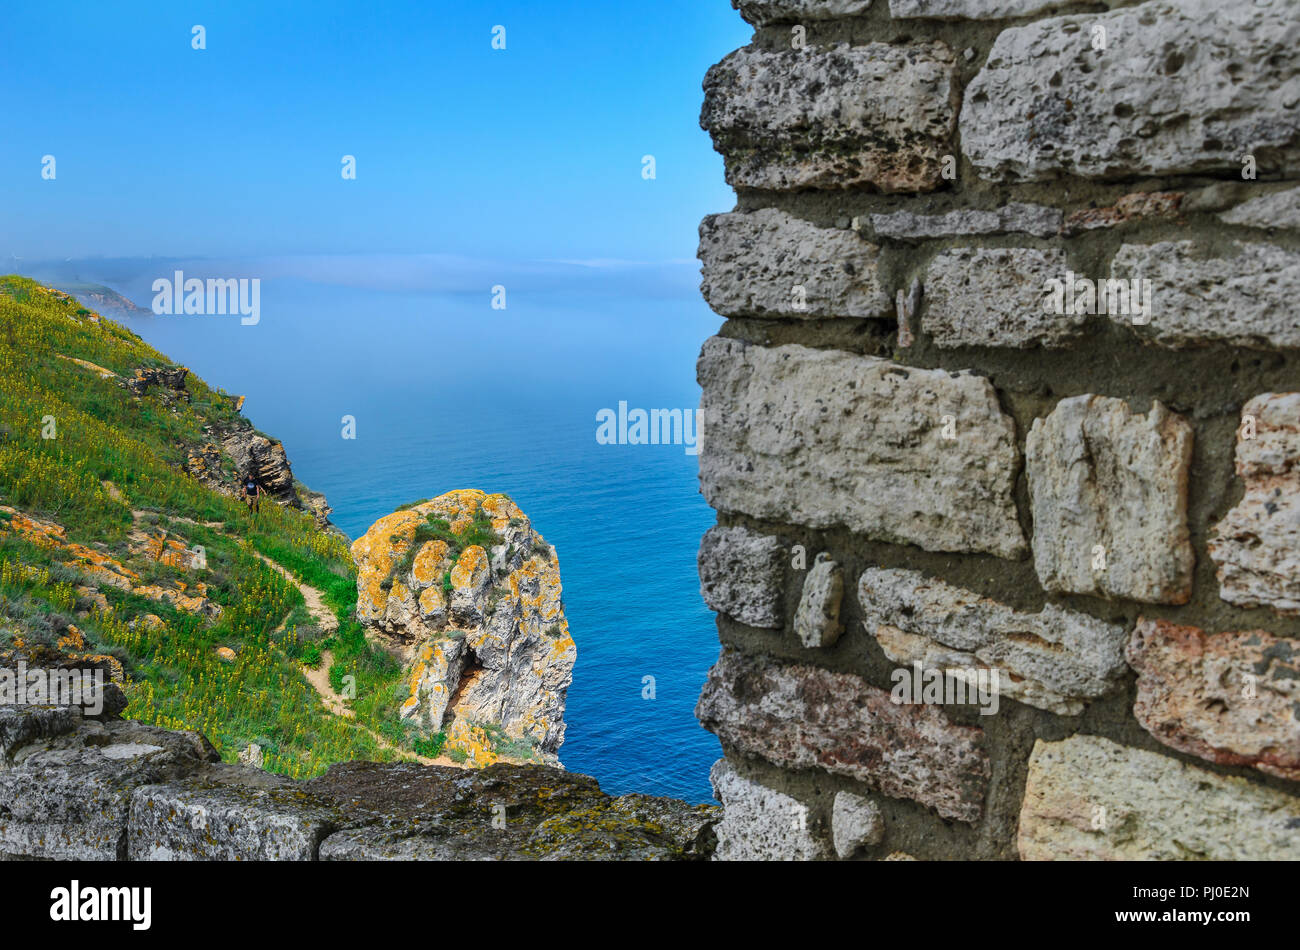 Cape Kaliakra, Bulgaria. One can see a stone in the shape of the head. Stock Photo